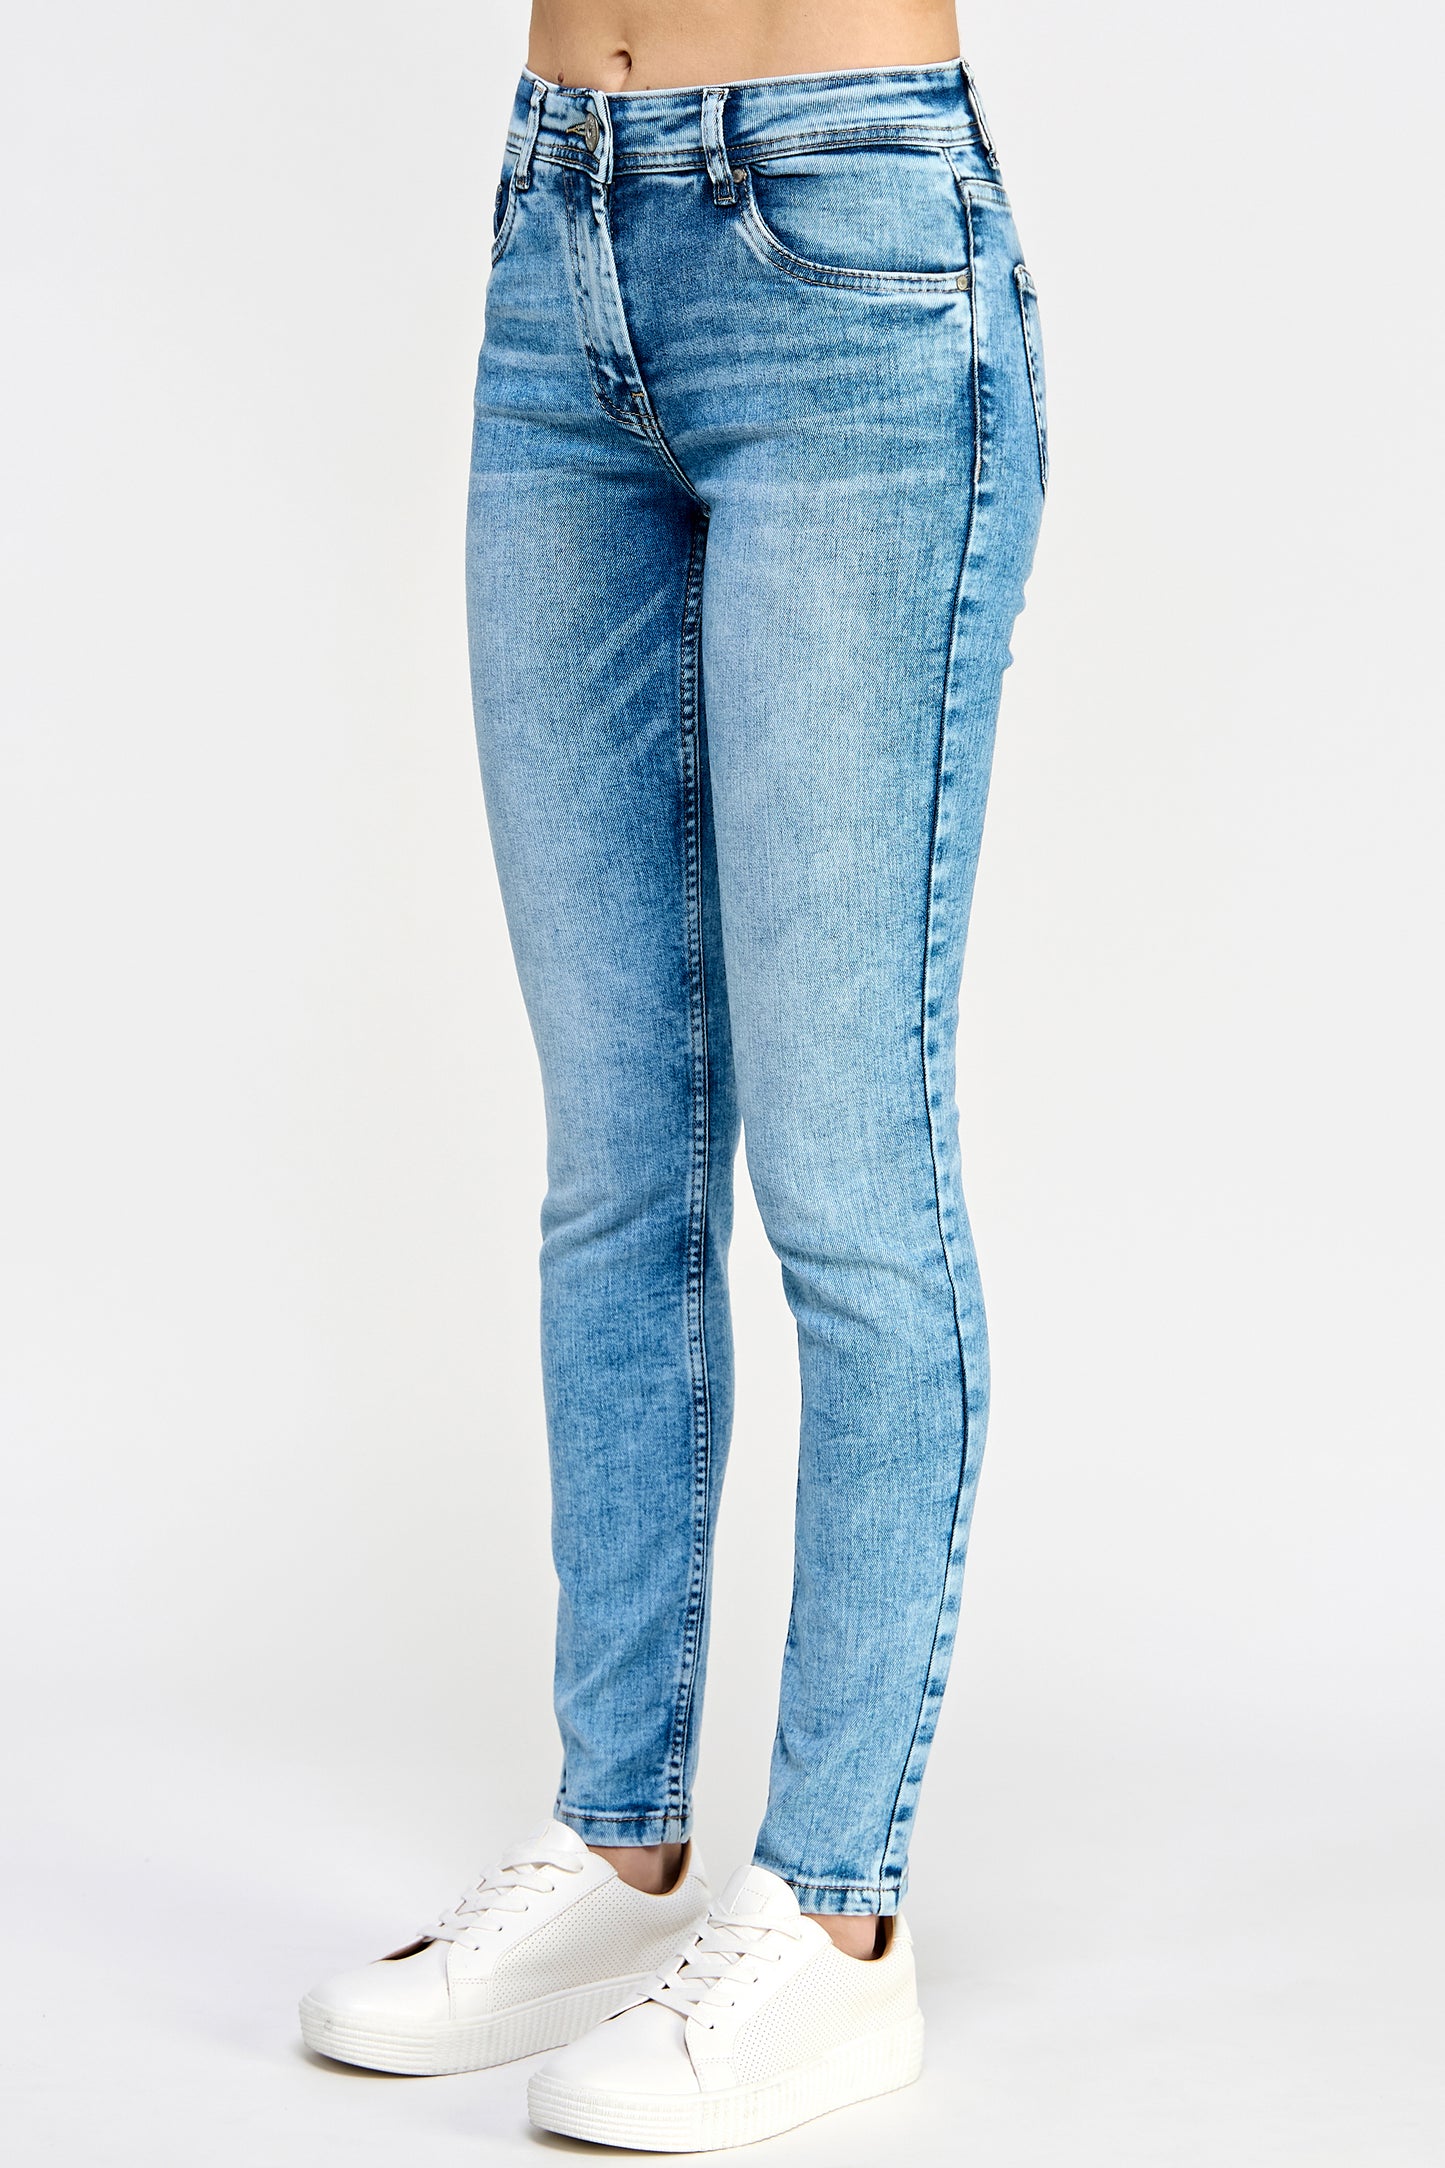 Erica Basic Fit Jeans